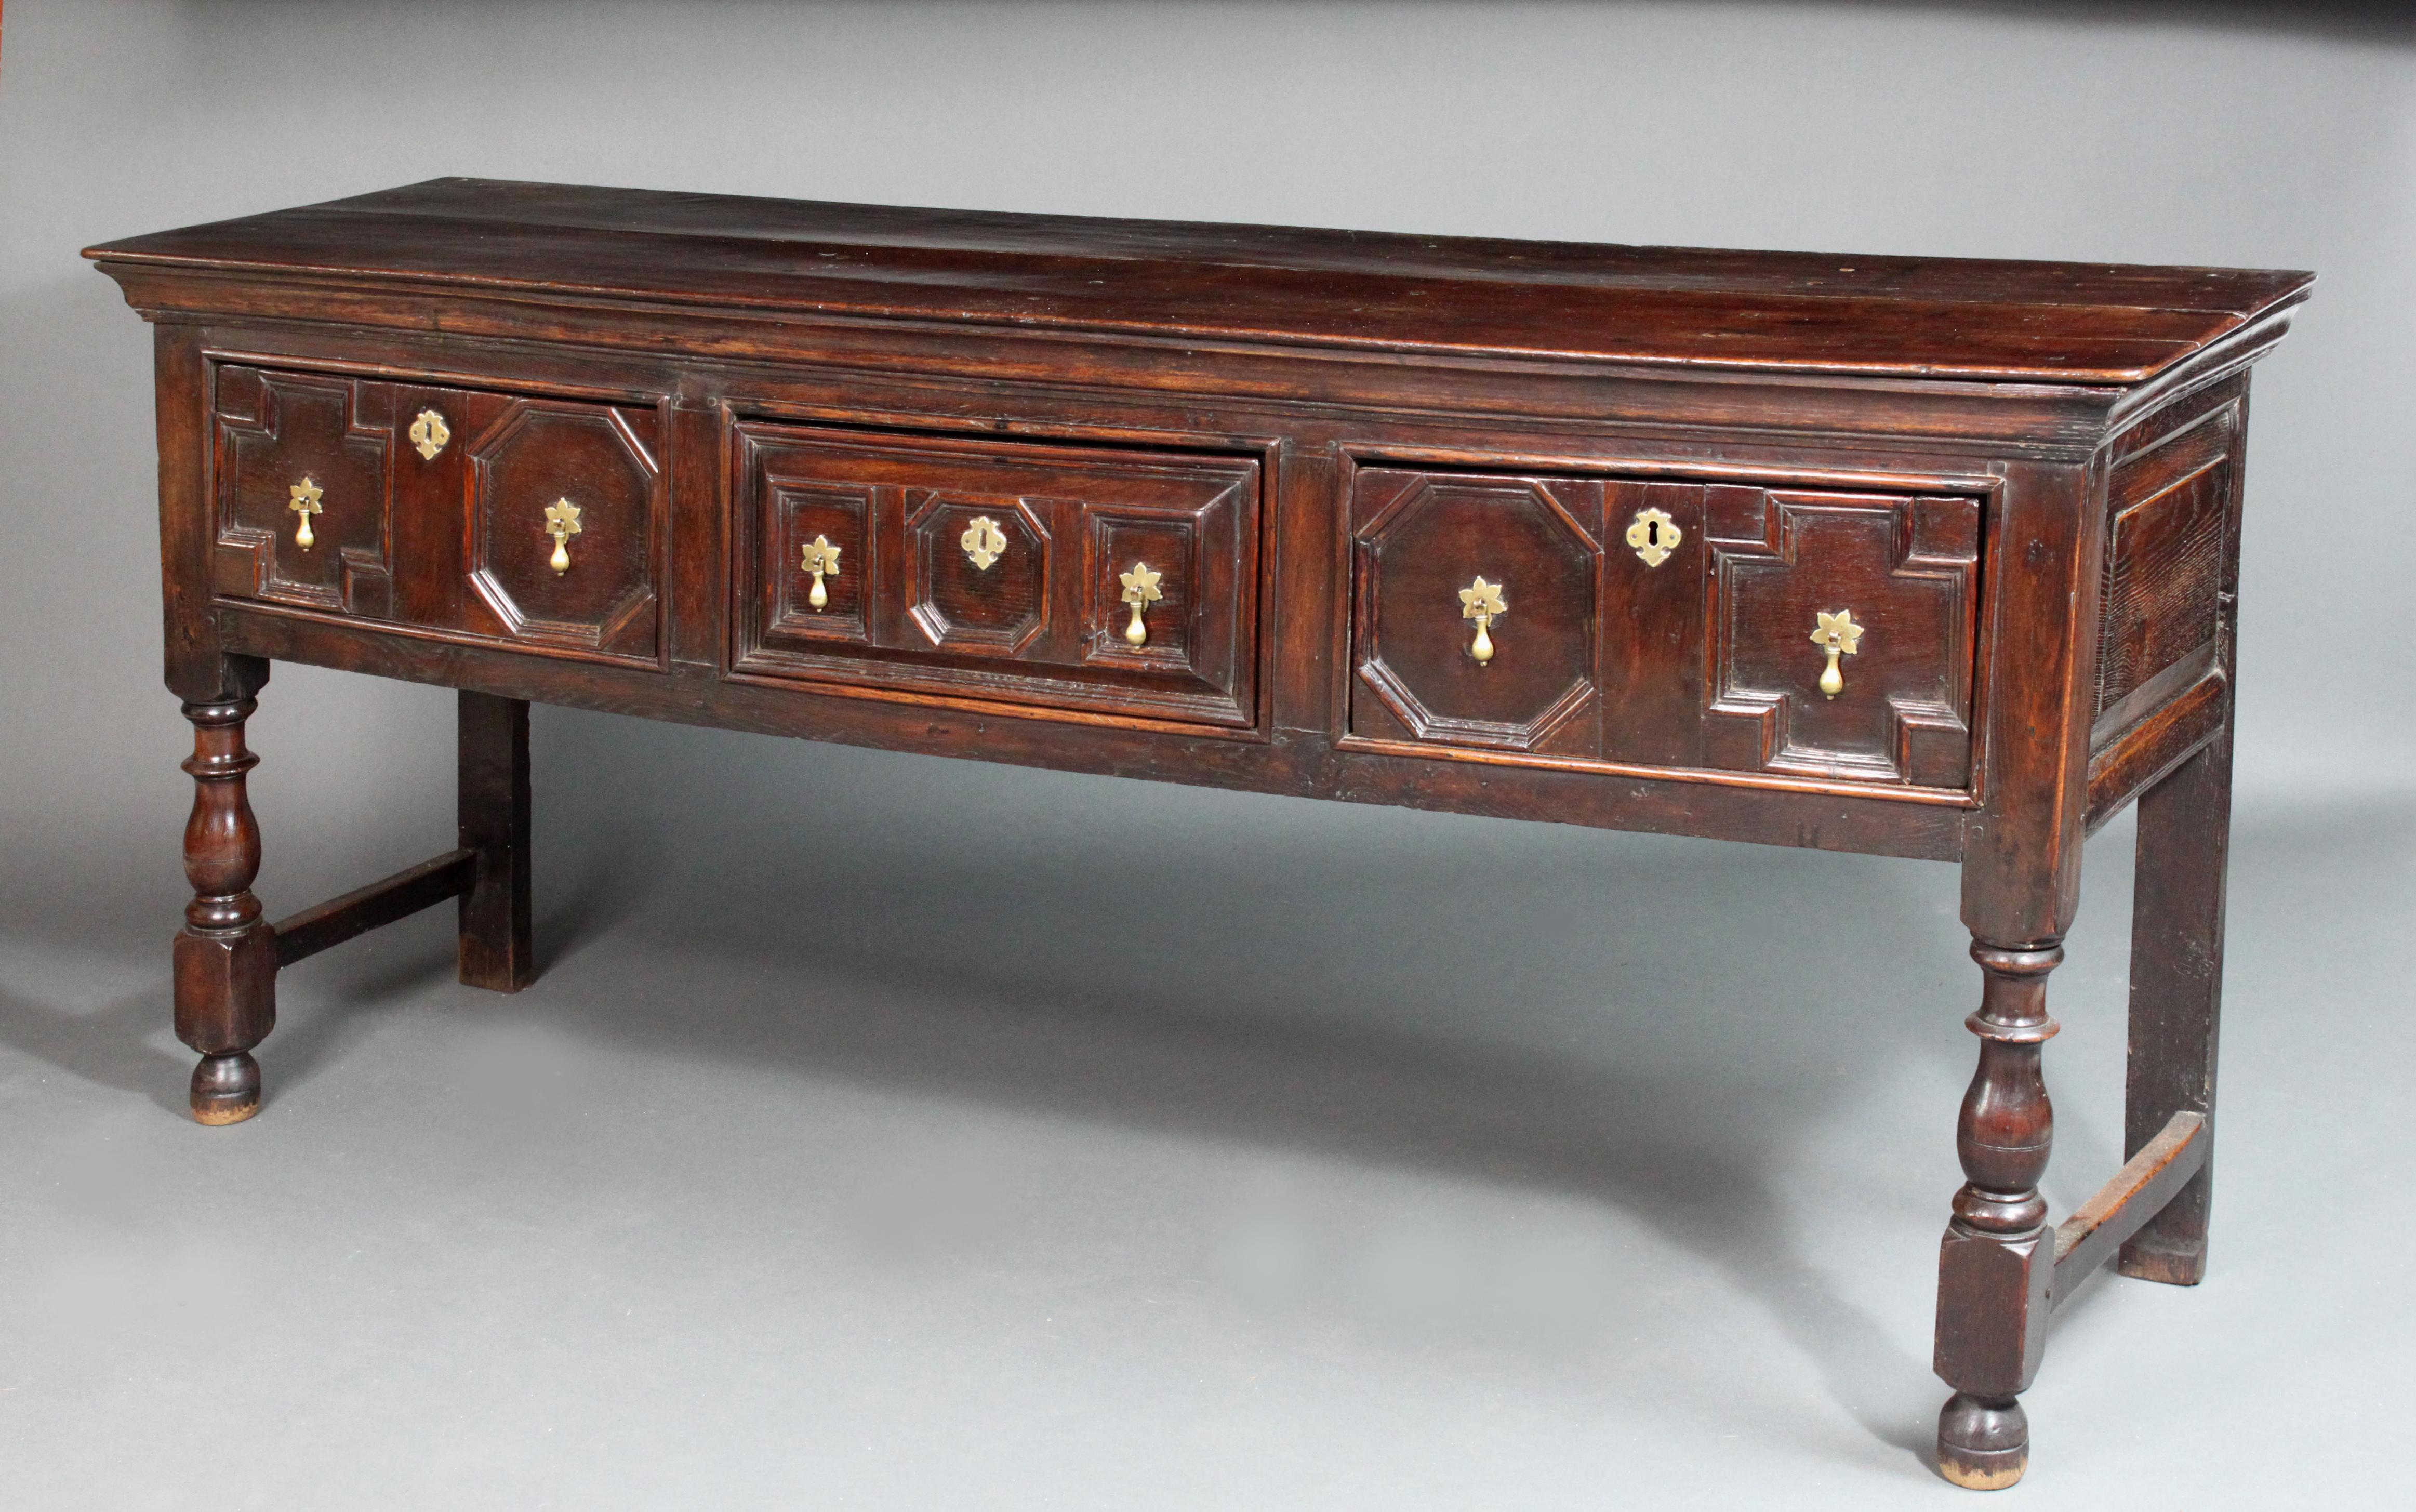 A Charles II oak serving dresser with its original colour and patina and handsome geometric moulded-front drawer fronts, side hung drawers (to stop the drawers from tipping when opened), panelled ends and good turned bulbous baluster legs; the